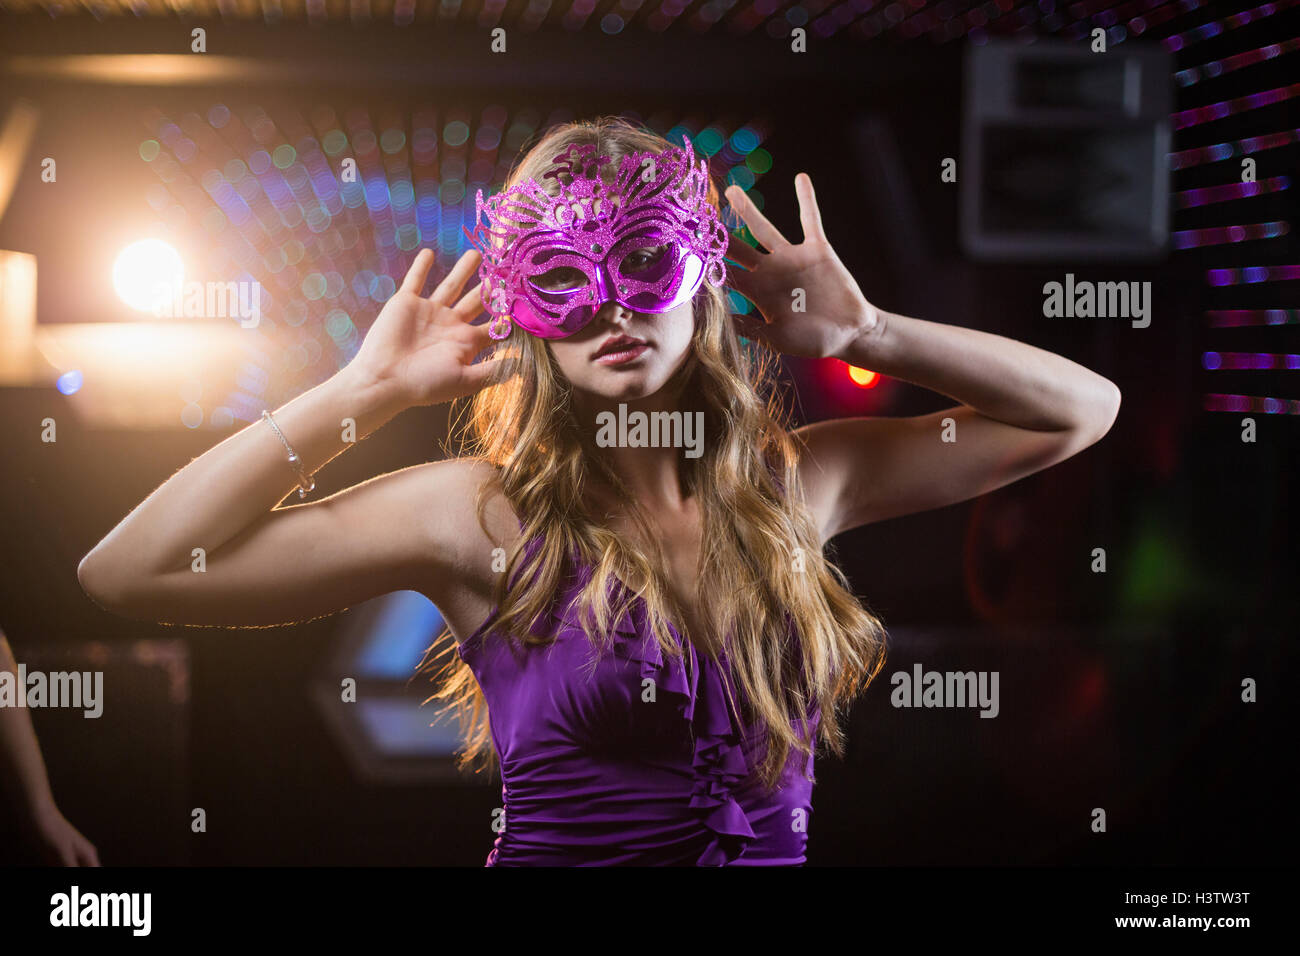 Woman with masquerade dancing on dance floor Stock Photo